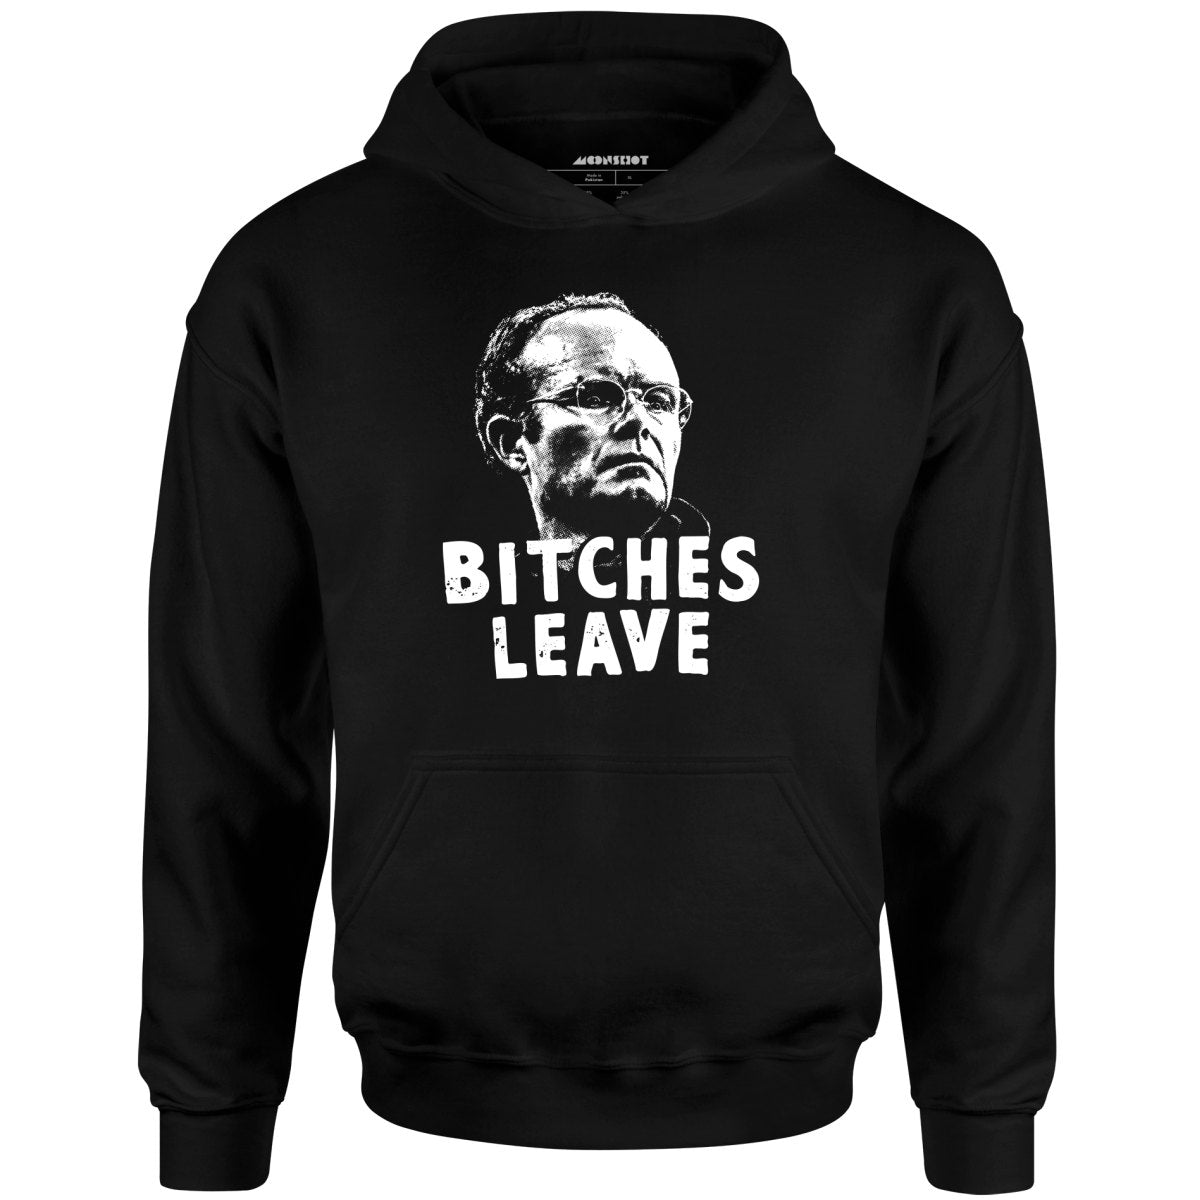 Bitches Leave - Unisex Hoodie